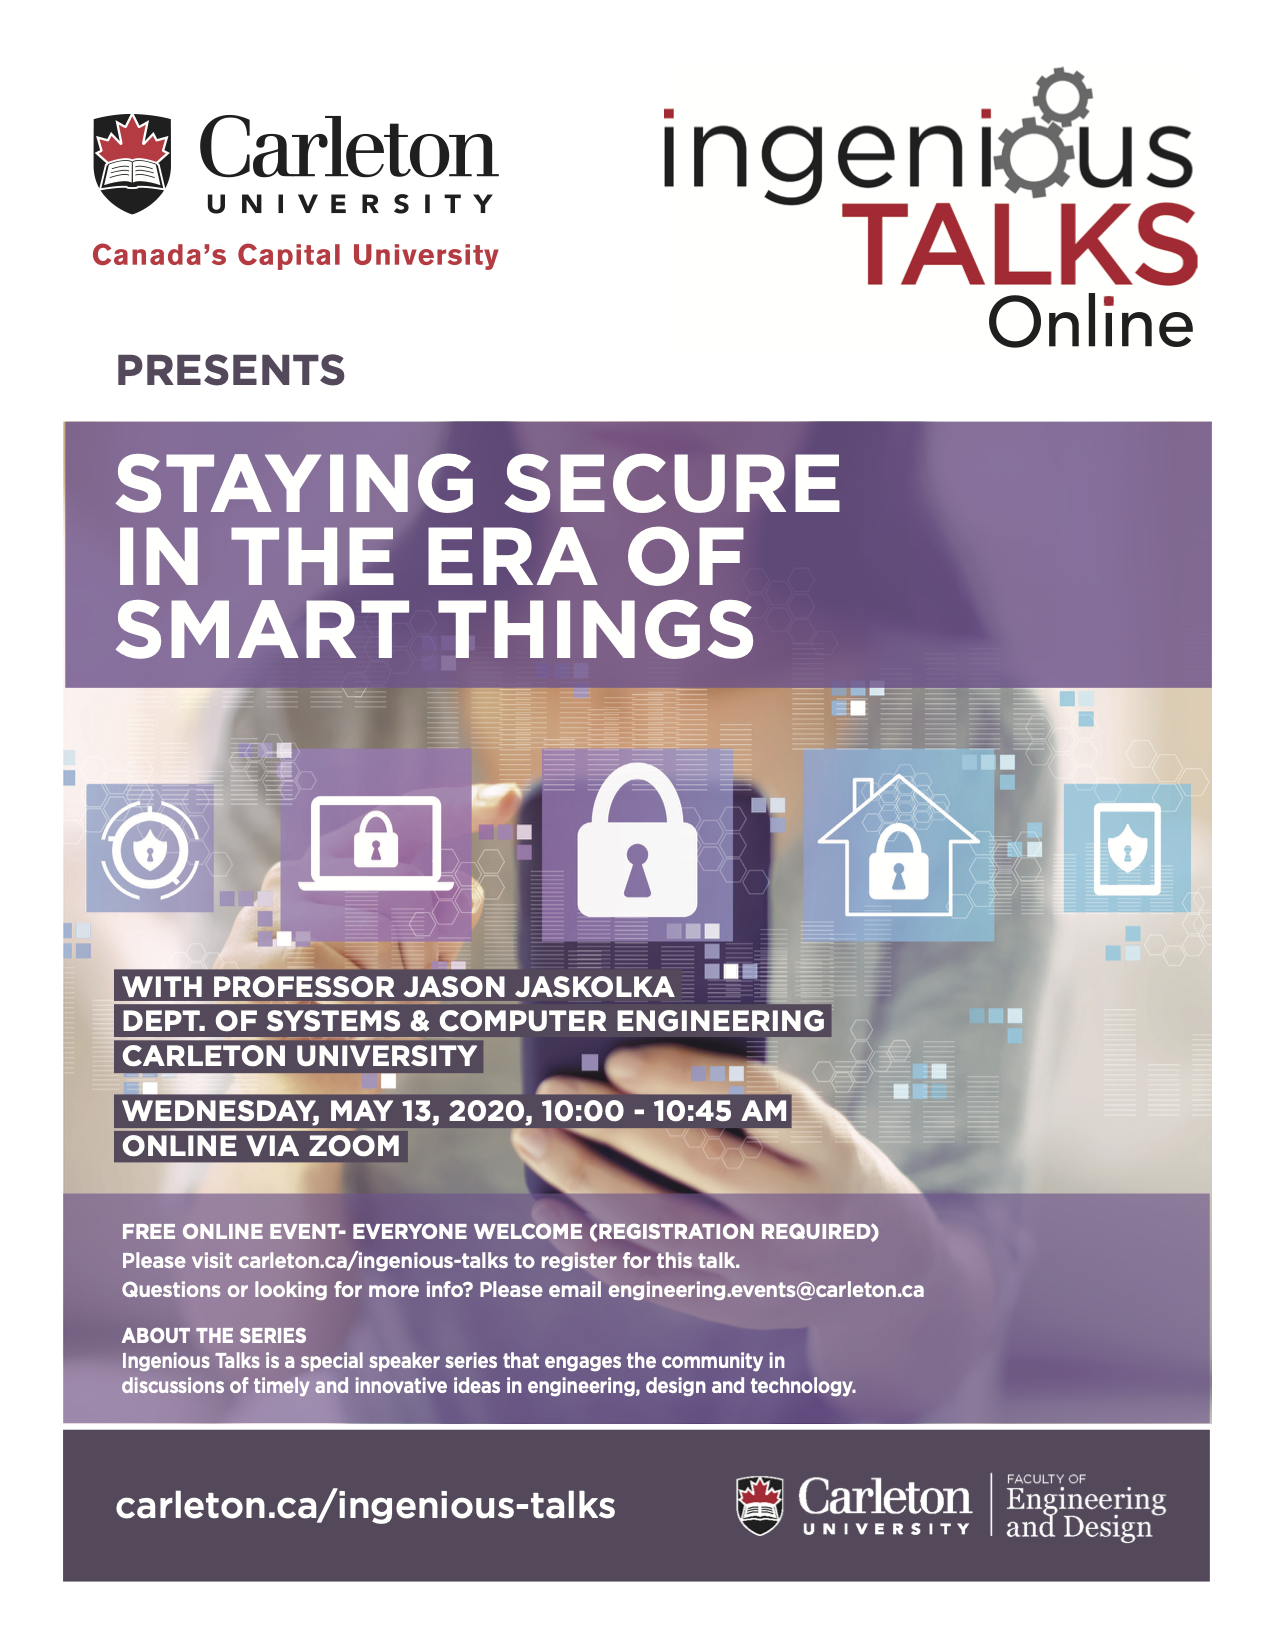 Ingenious Talks Online: Staying Secure in the Era of Smart Things